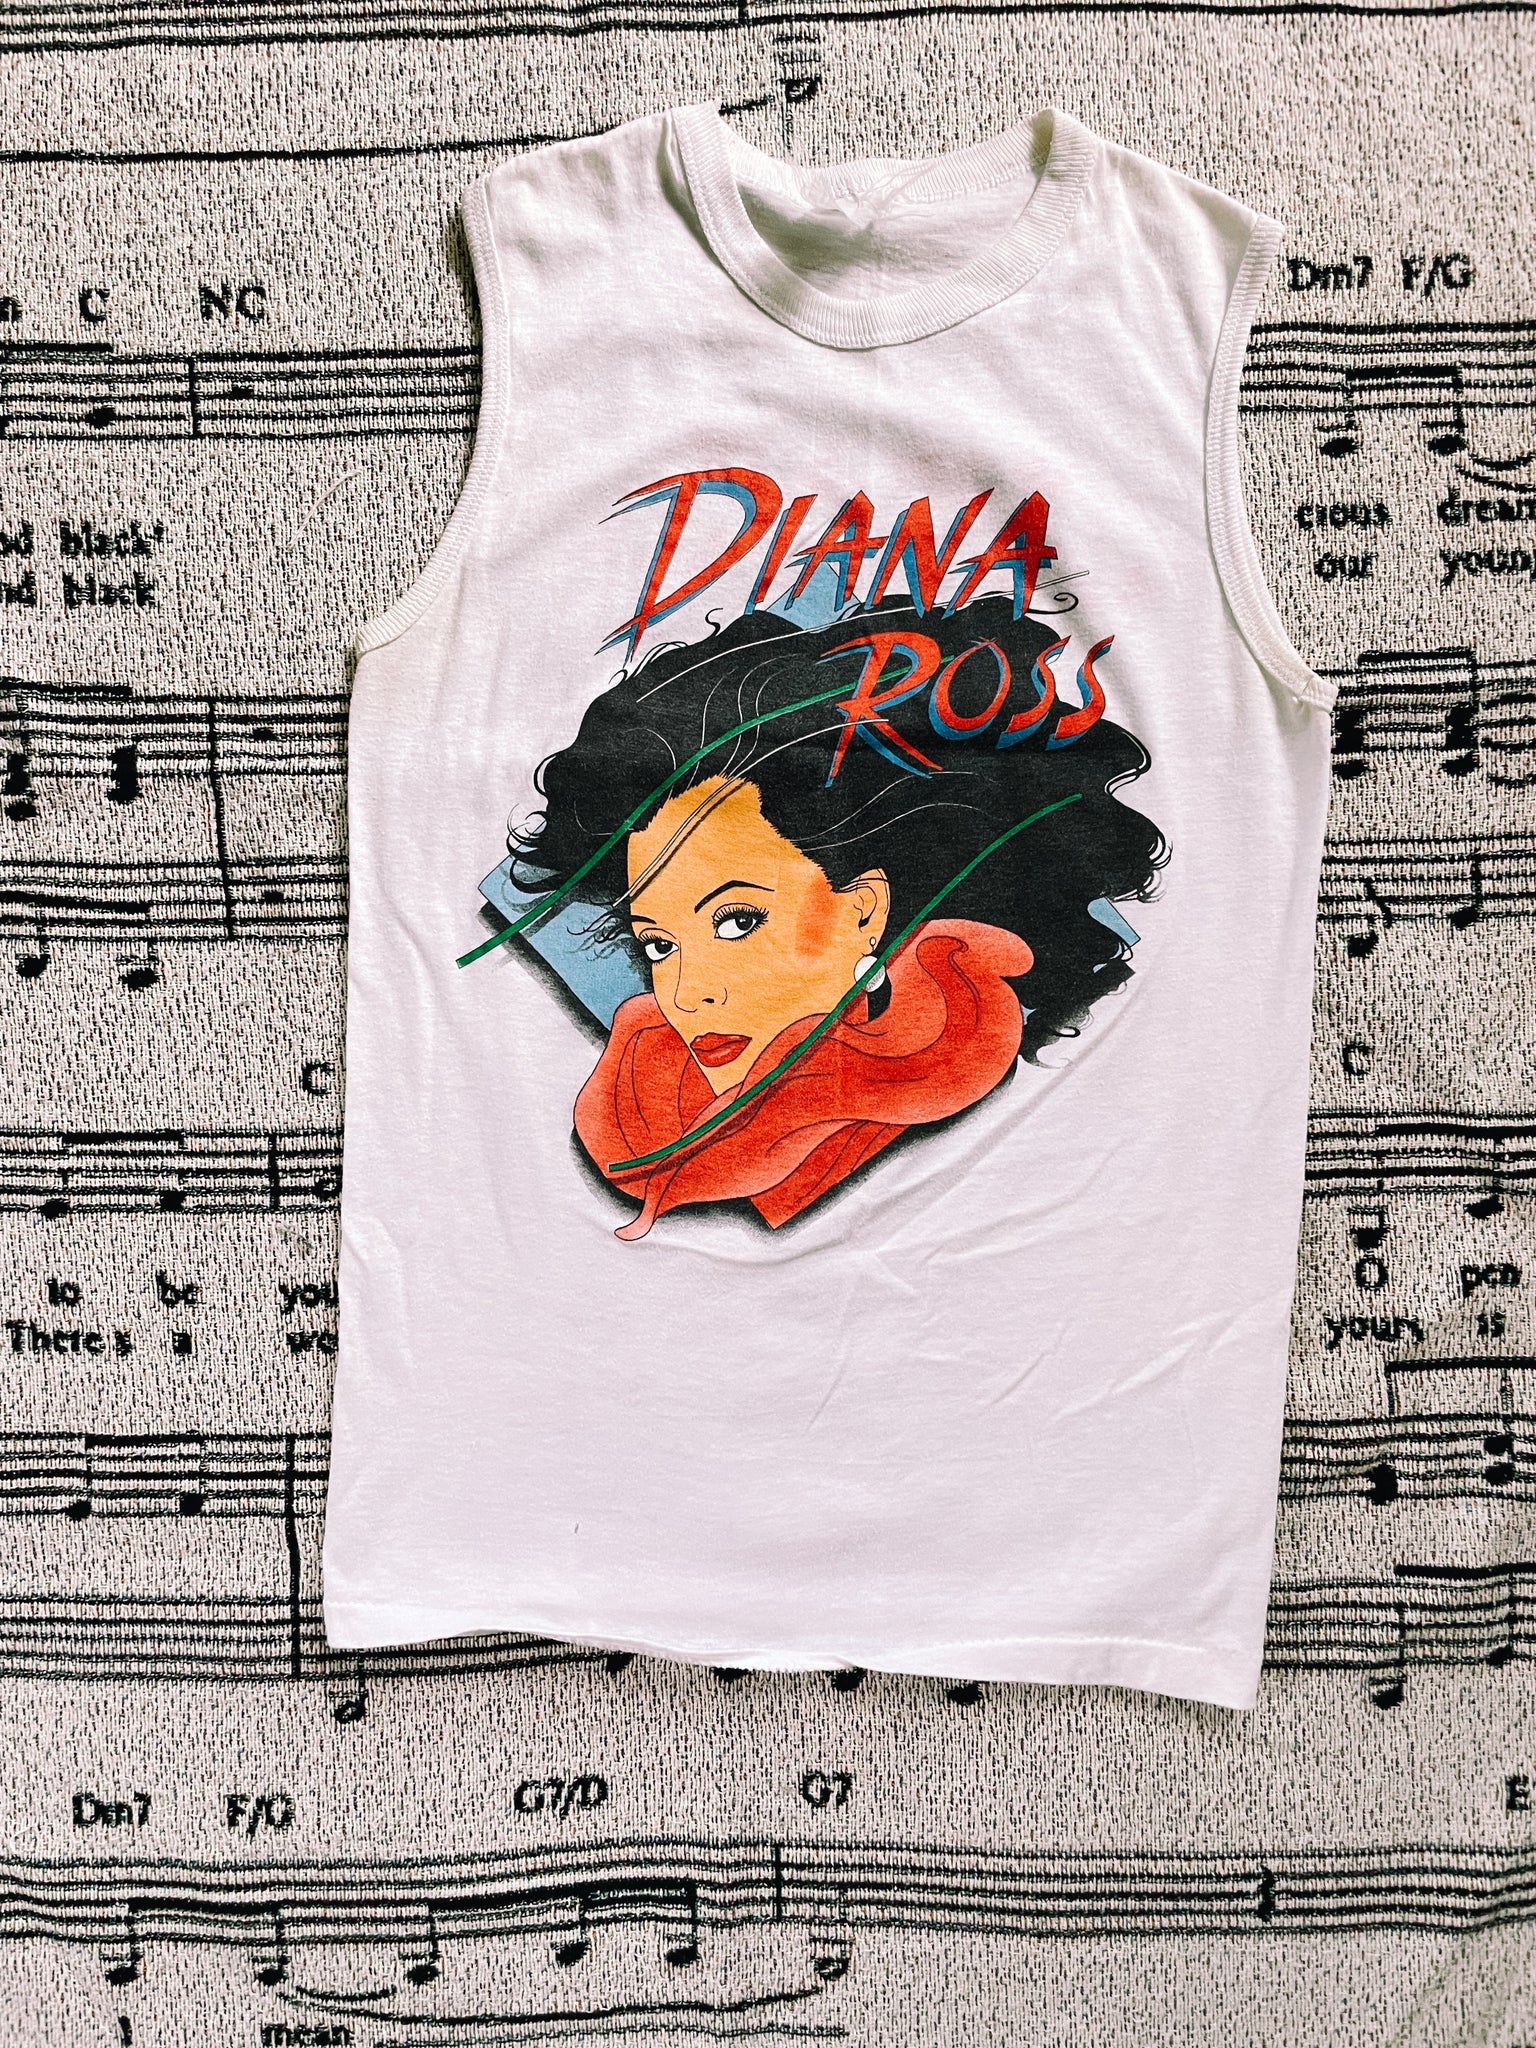 Vintage Diana Ross "For One And For All" Concert T-Shirt (1983)